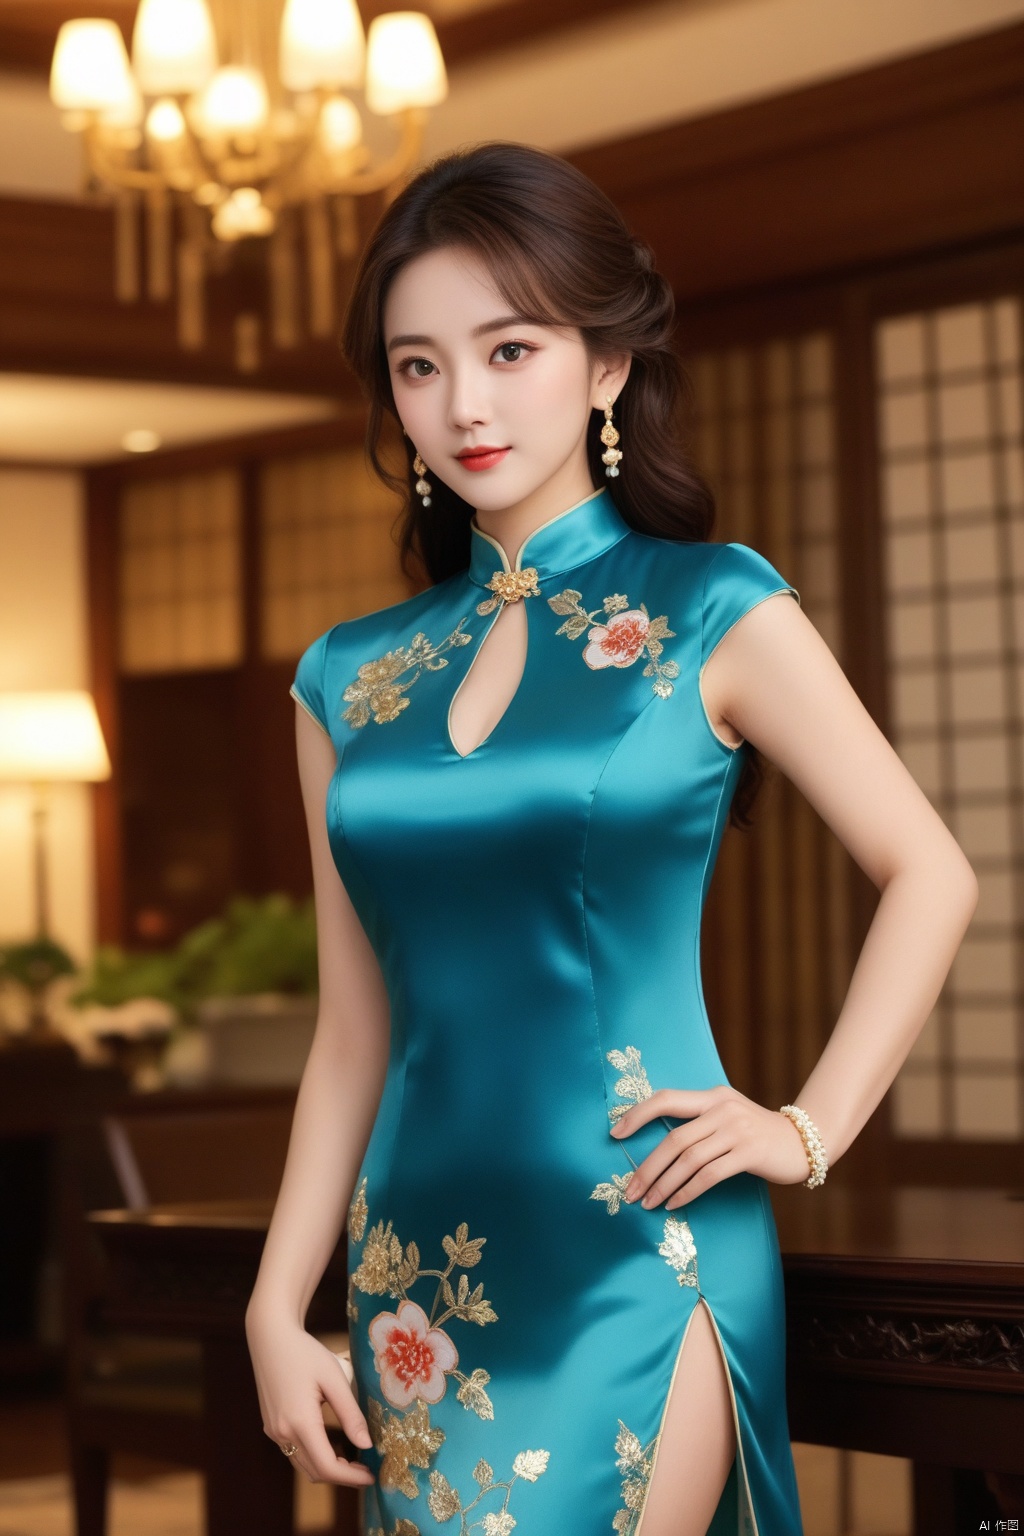  (((full body photo))), (a Busty lady),(Elegant),((cowboy_shot)), ((Blue printed satin short-sleeved cheongsam)), Long skirt with side slit, ((Long curly hair)), ((swept bangs)), ((Floral Hairpin)), ((Pearl necklace)), (((Pendant earrings made of gold))),(((engagement ring))),(((A bracelet made of jade))), ((A lady stands in the living room)),(At night, warm and soft lighting),
, ((poakl)),